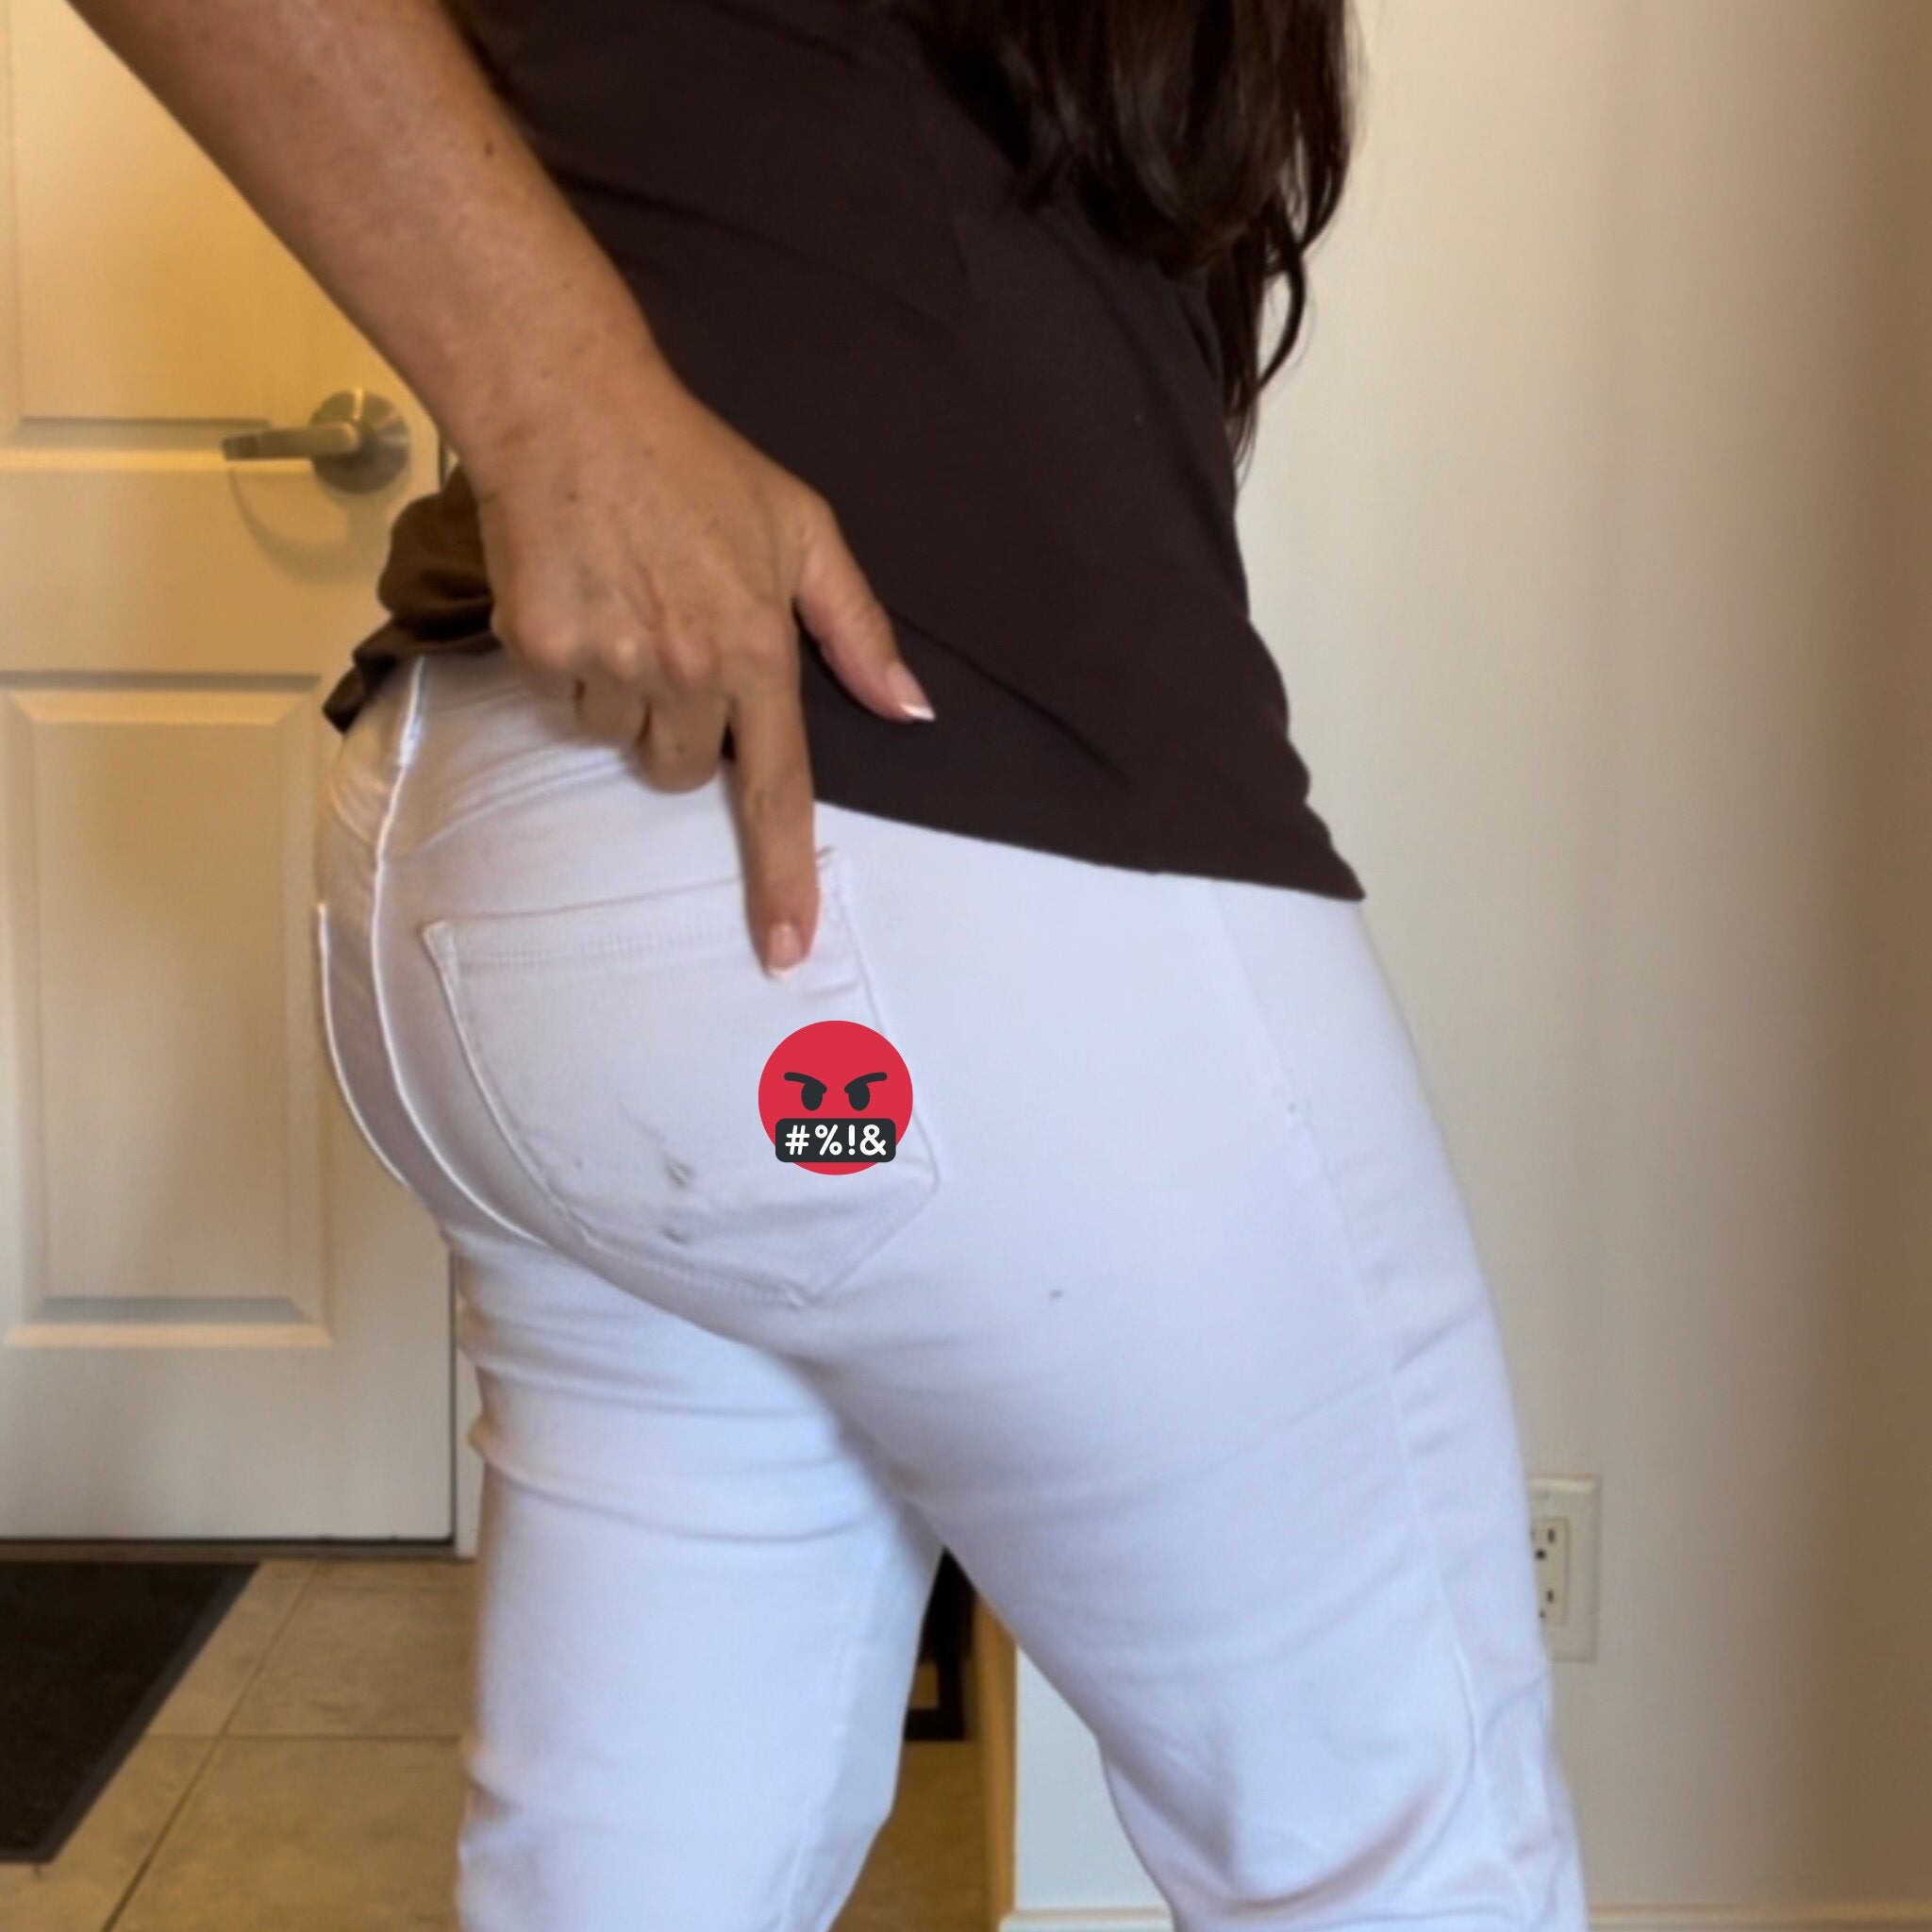 Seat Square | Image of woman wearing white pants pointing to a dark stain on butt from an Uber car seat